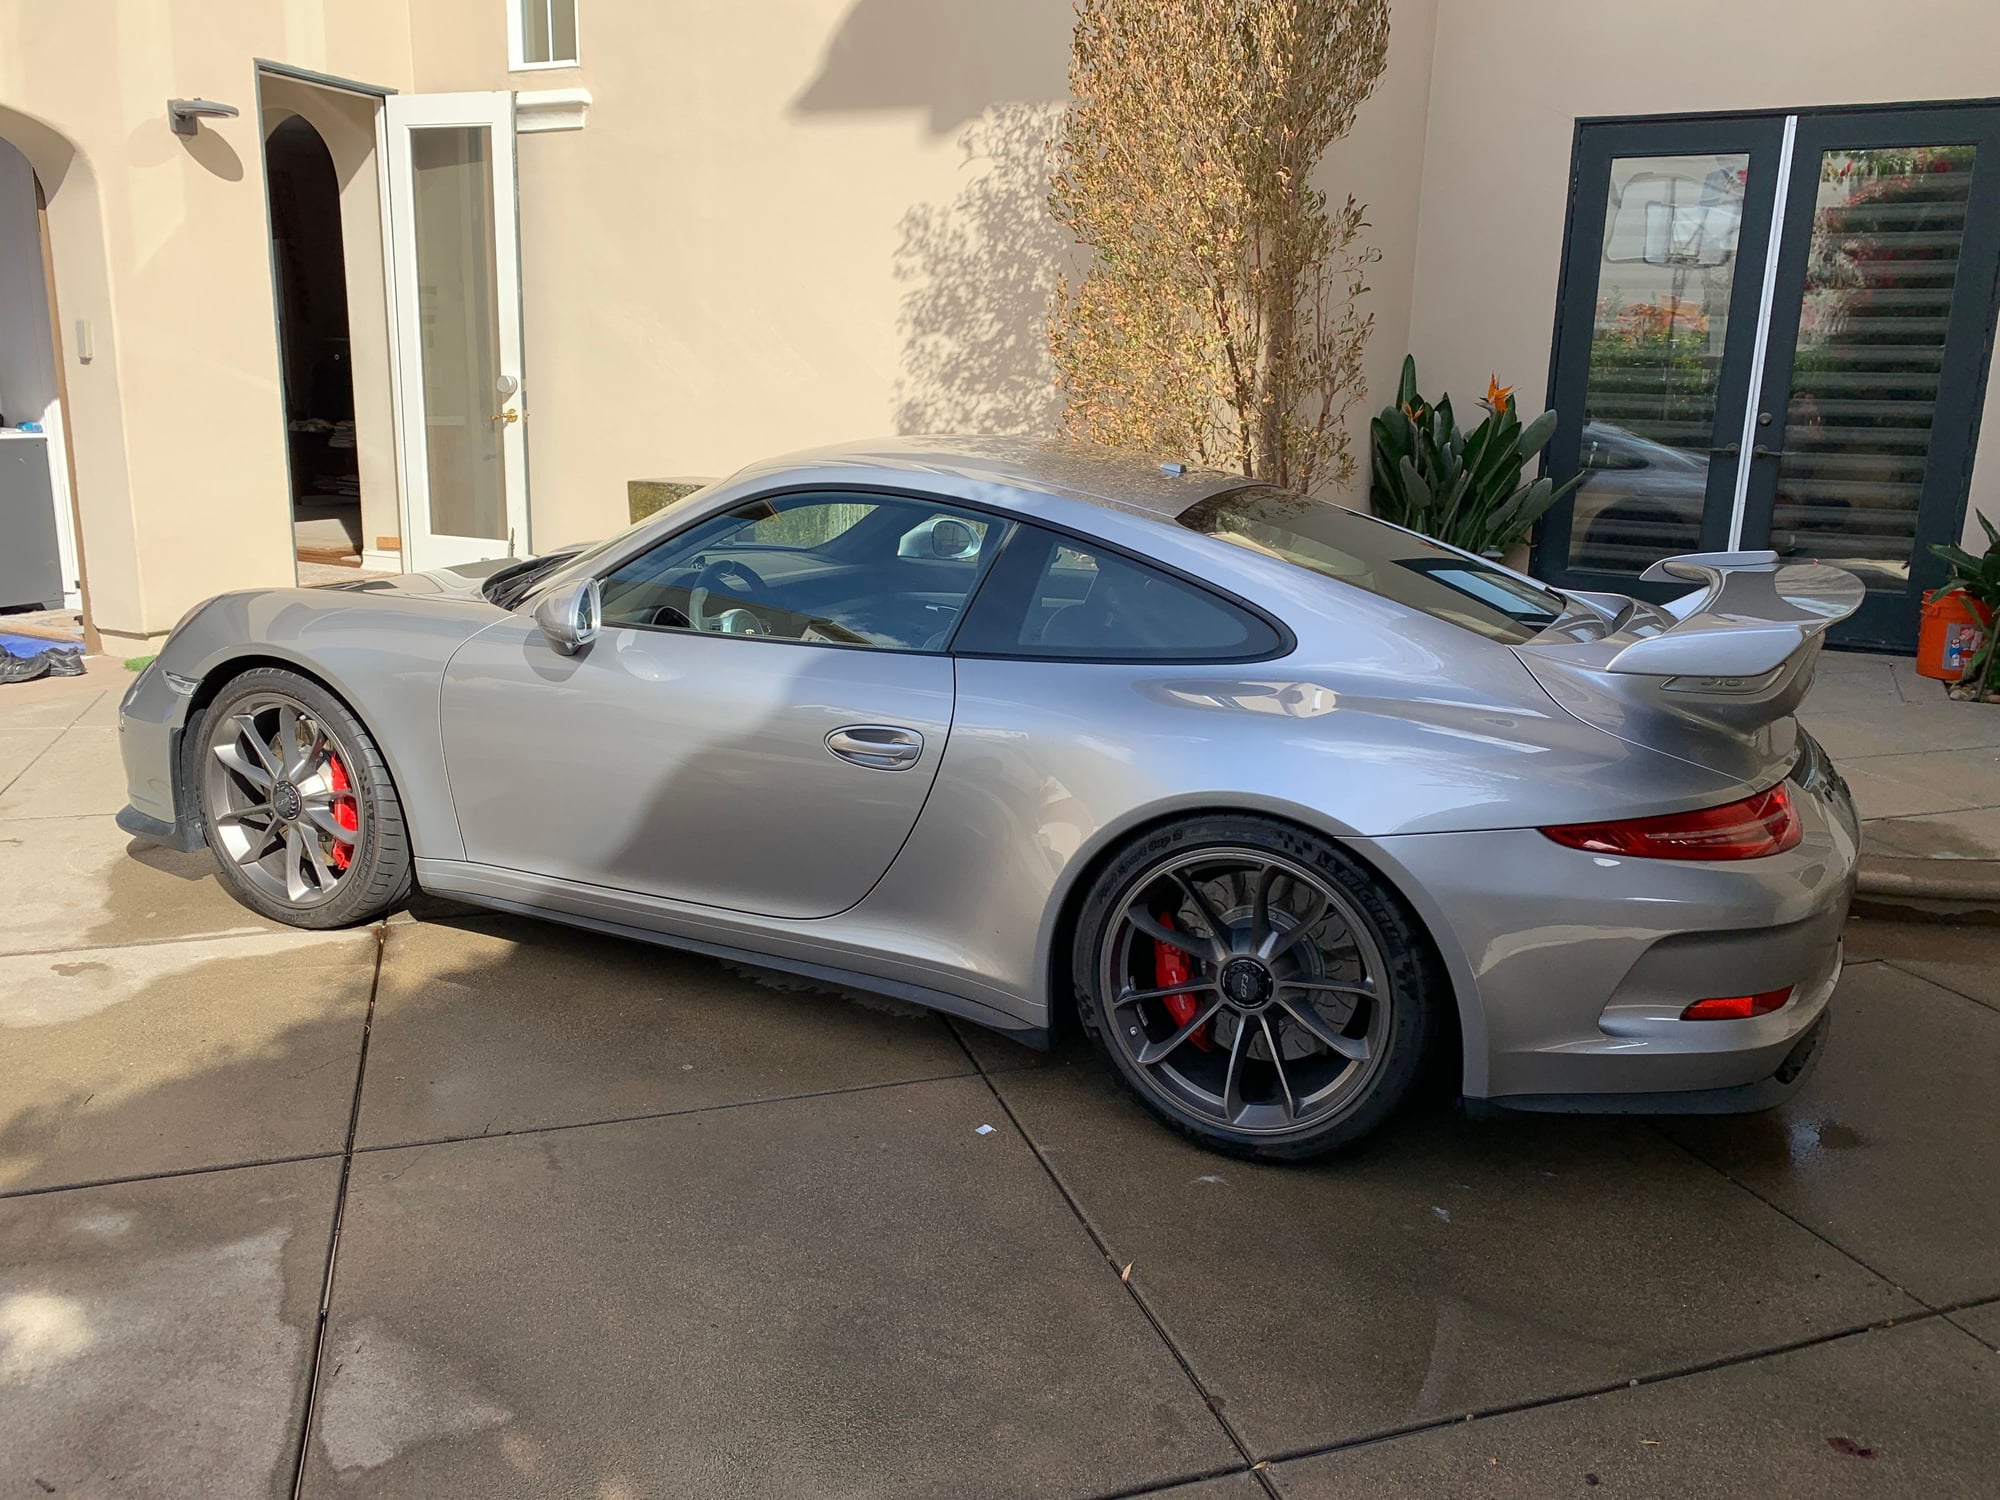 2015 Porsche GT3 - 2015 Porsche 911 GT3 in GT Silver Metallic - Used - VIN WP0AC2A90FS183868 - 17,600 Miles - 6 cyl - 2WD - Automatic - Coupe - Silver - Orange County, CA 92660, United States